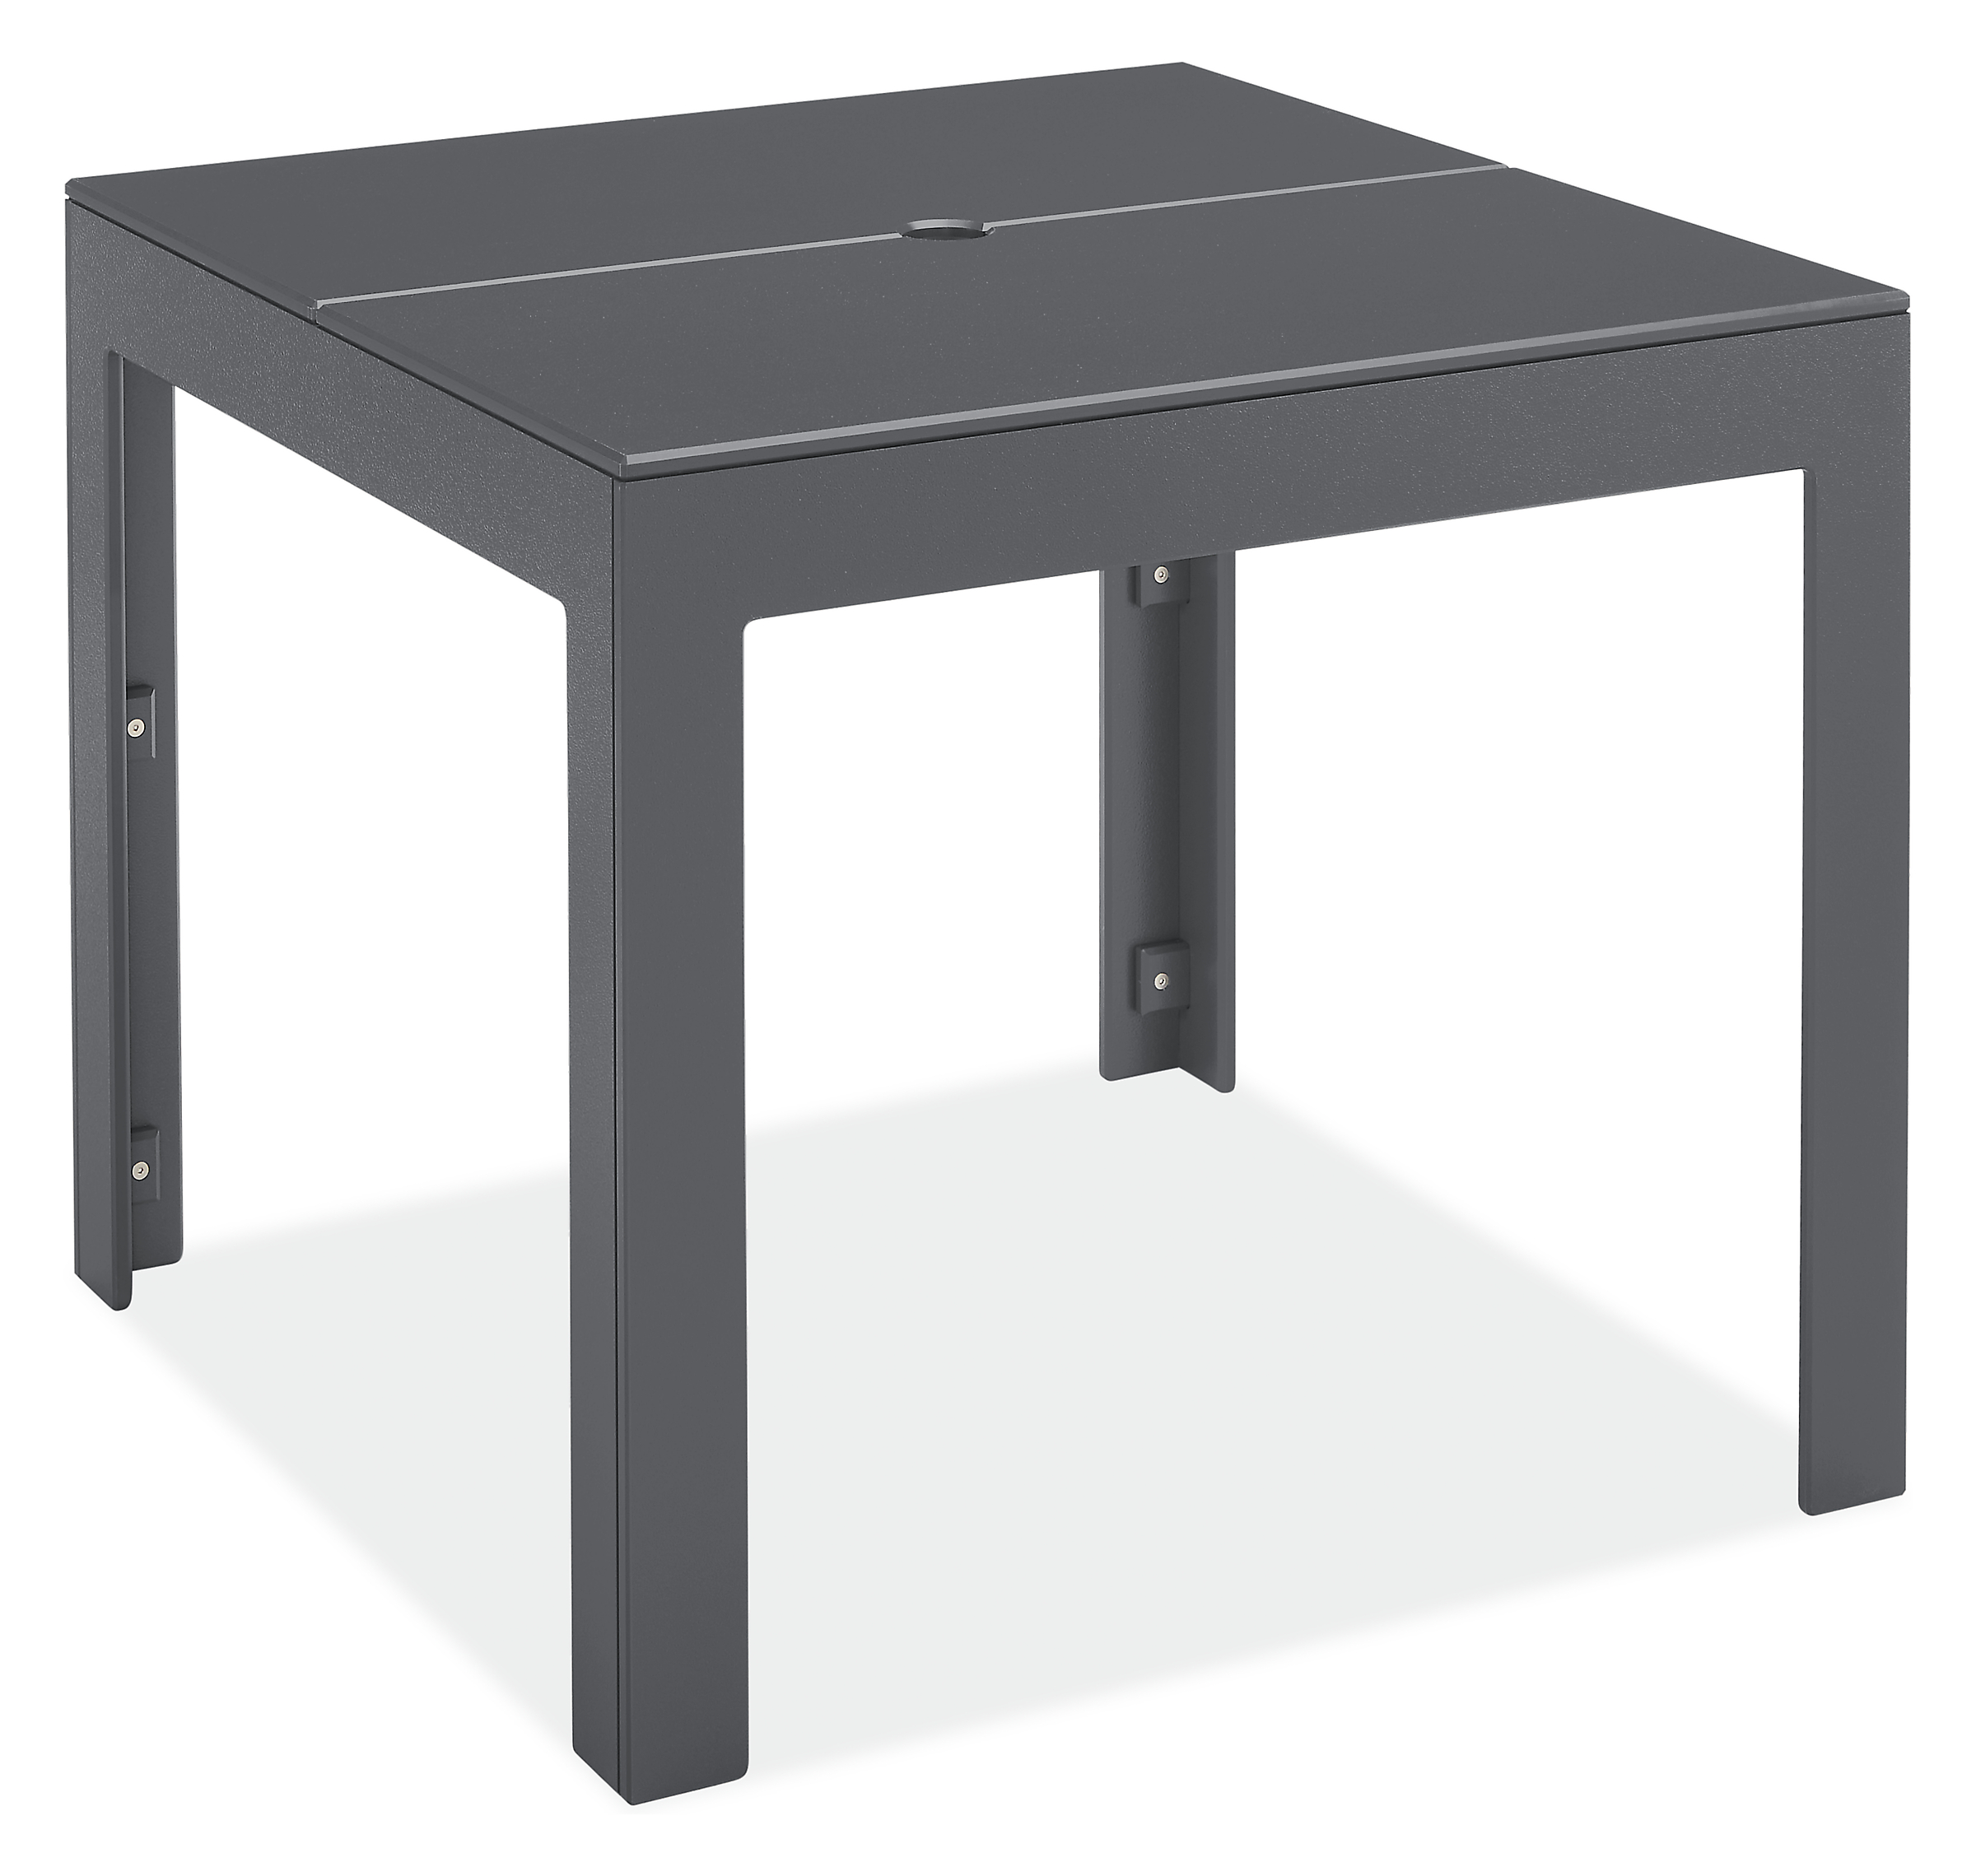 Henry 36w 36d 30h Table with Umbrella Hole